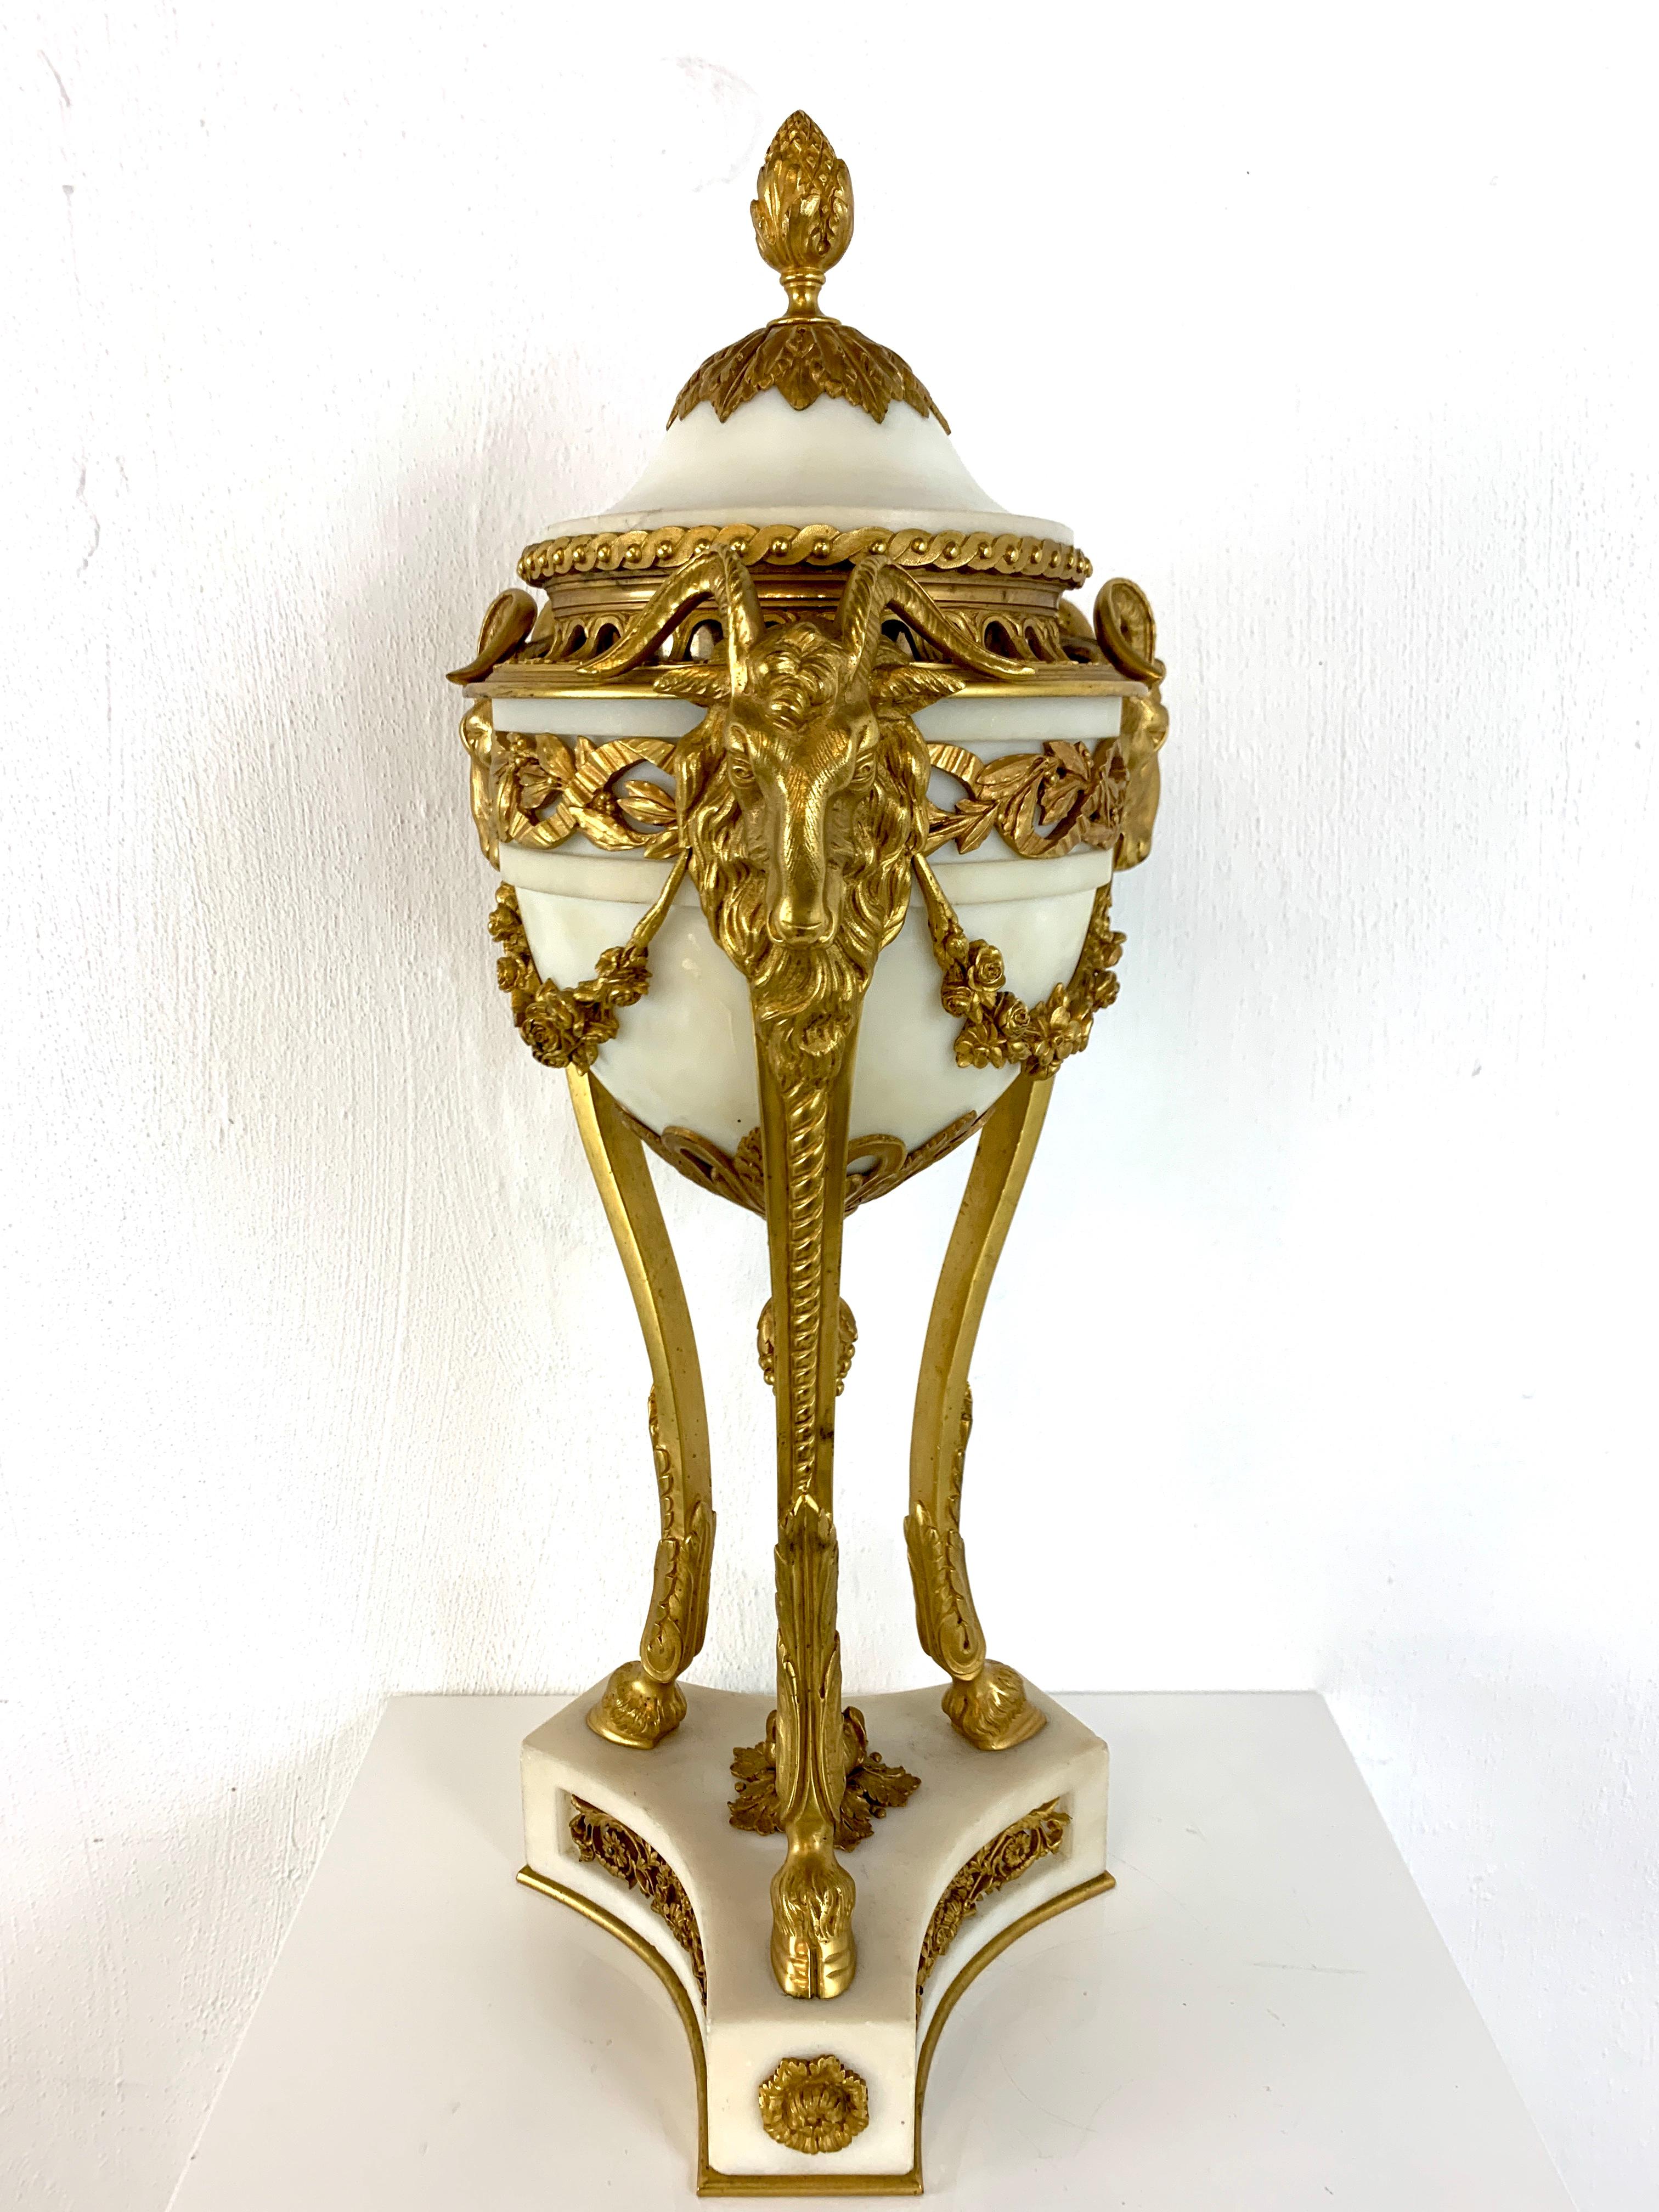 Single Louis XVI Style Ormolu and Marble Neoclassical Cassolette/Urn For Sale 8